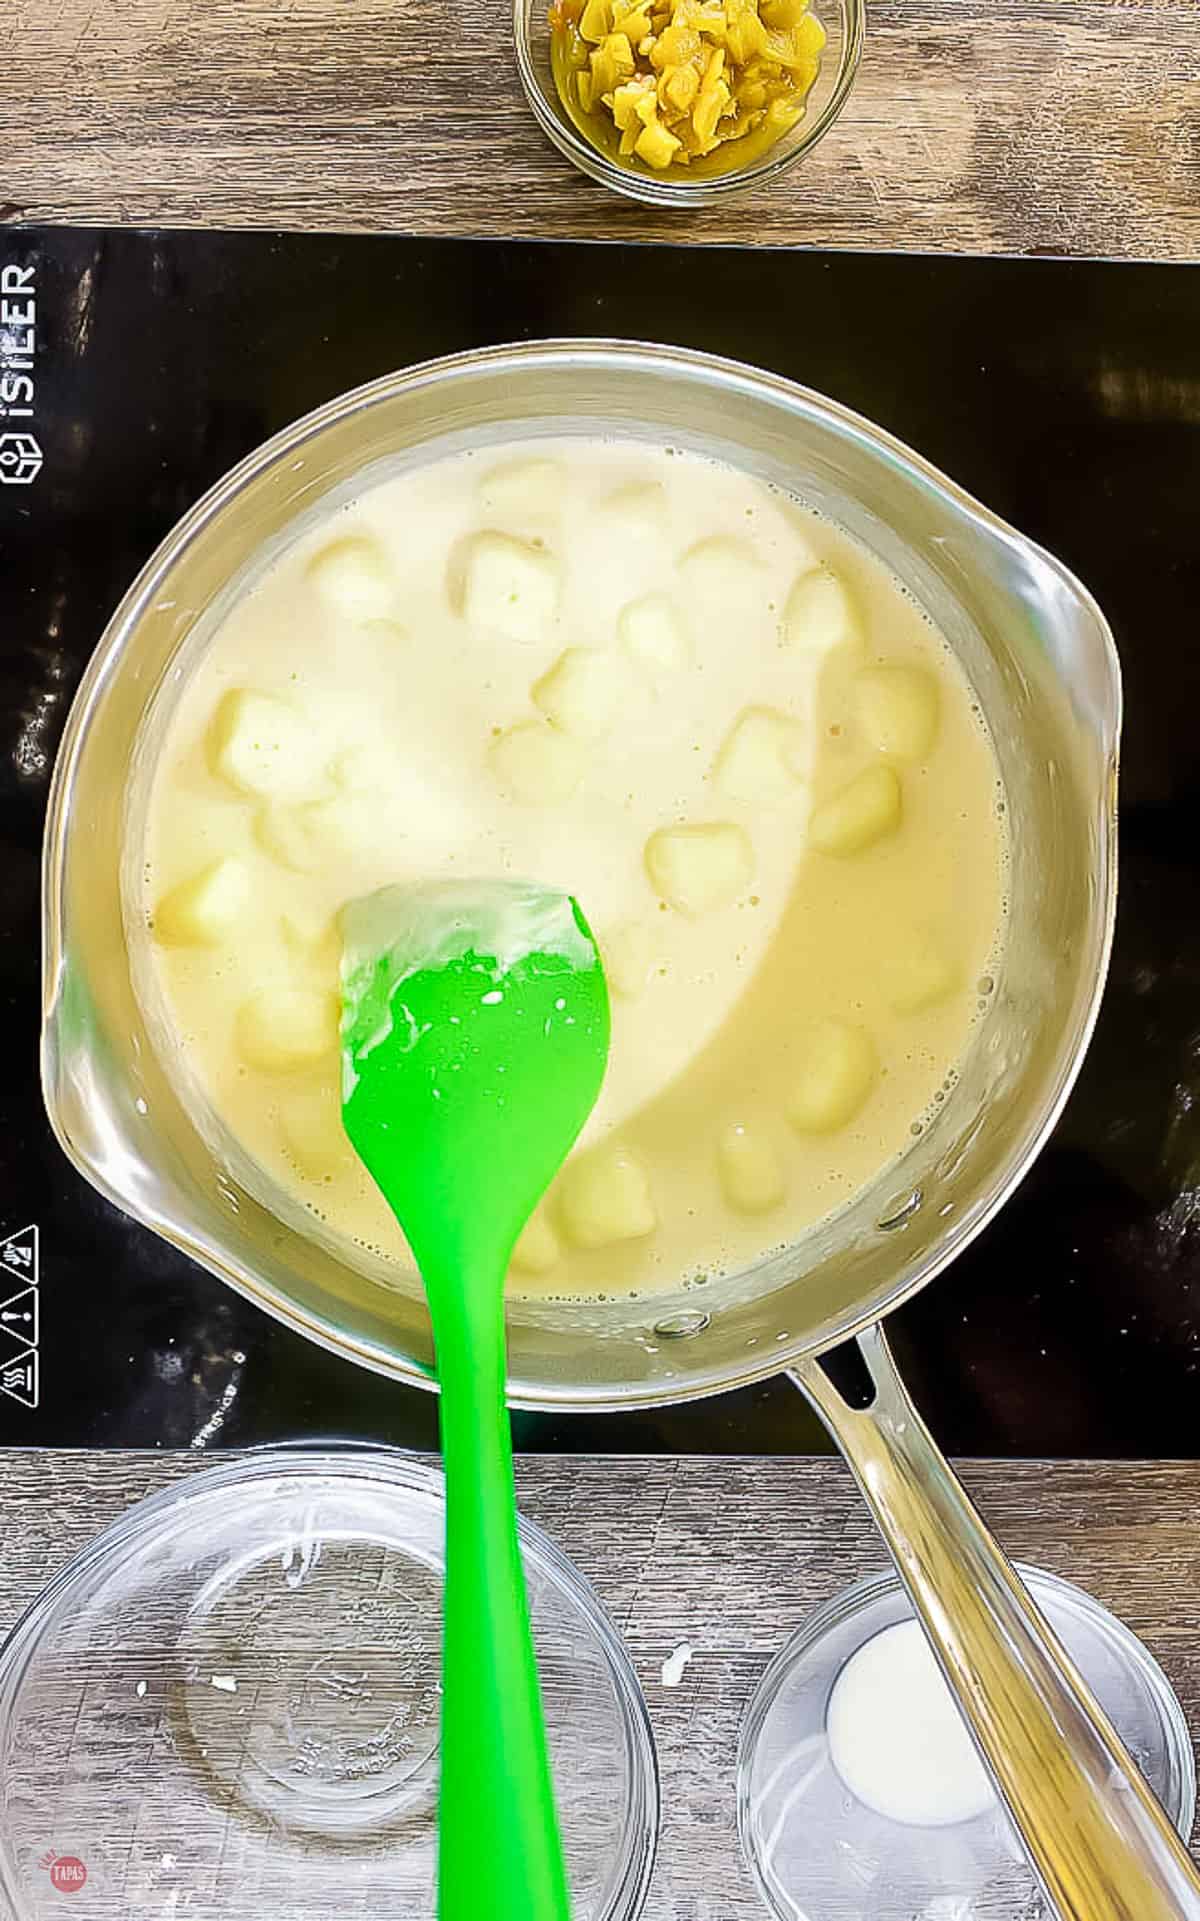 melted cheese in a pan